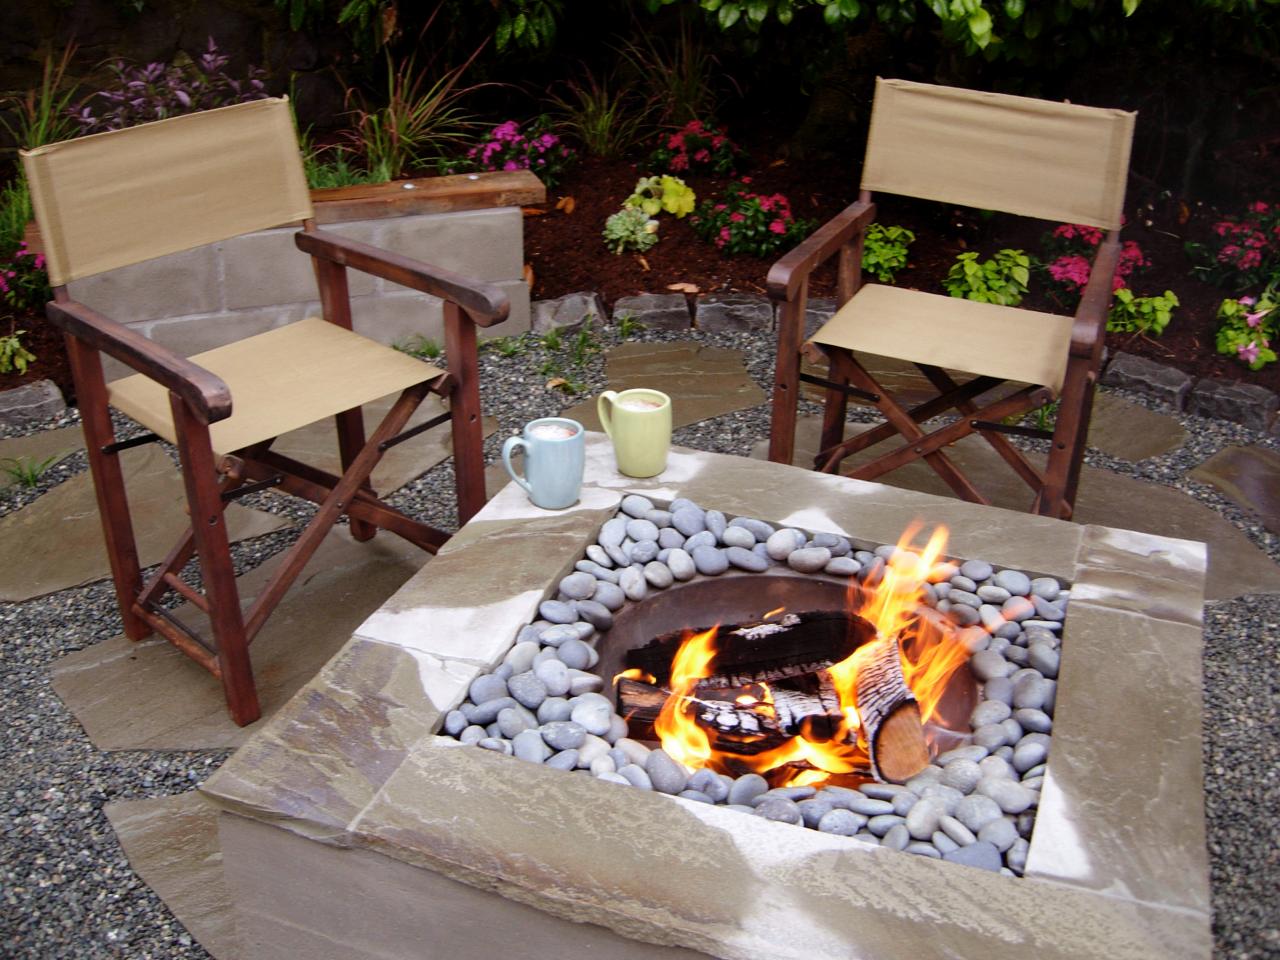 How To Make A Concrete Fire Feature, Outdoor Fire Pit Repair